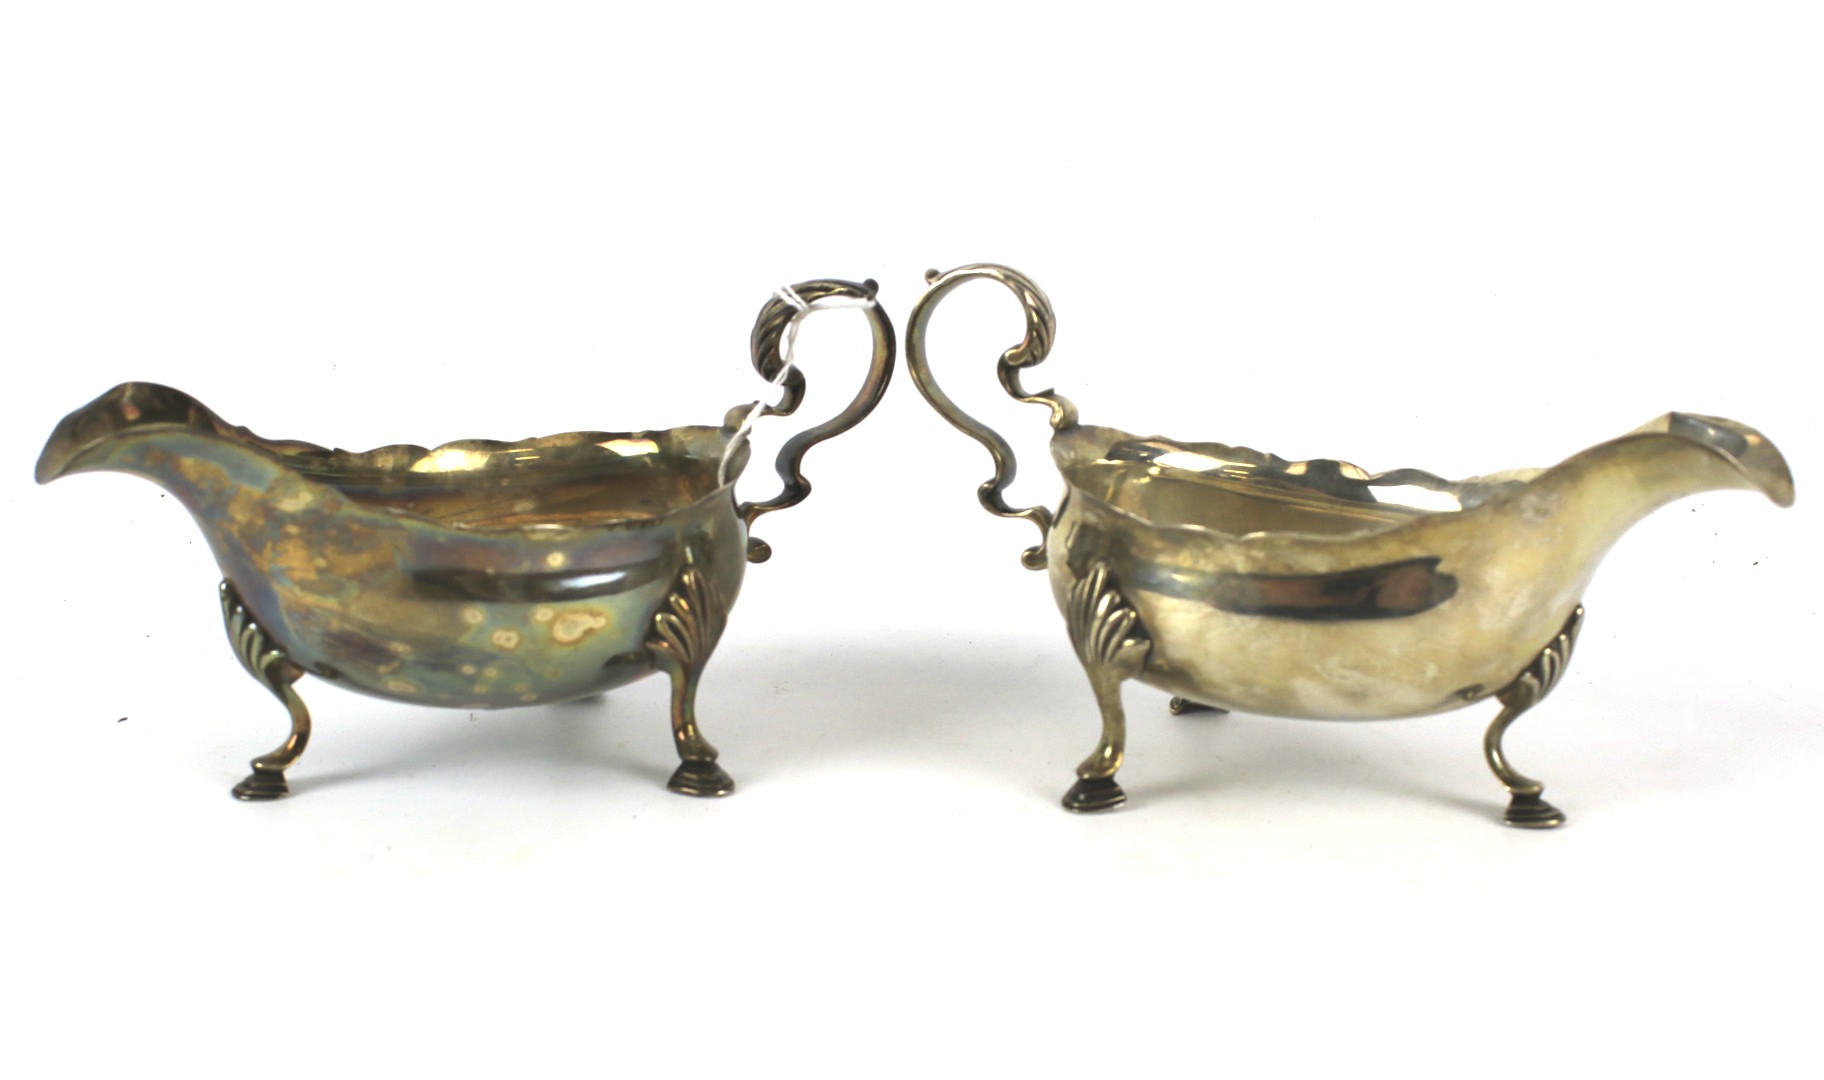 A pair of silver sauce boats with foliate decorated handles. Raised on shell and hoof supports.